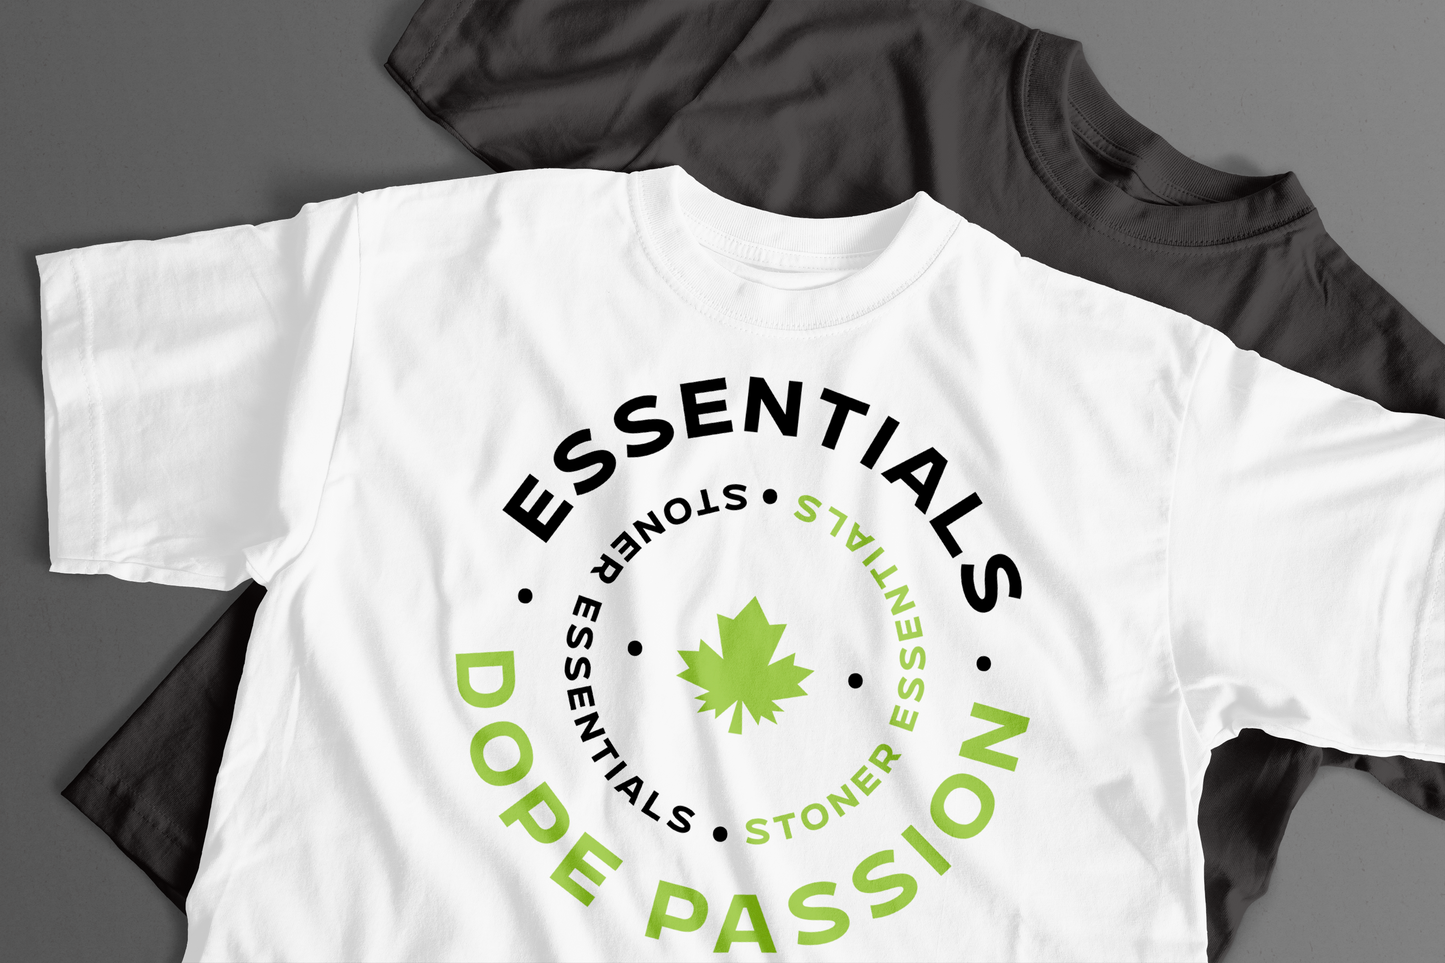 DOPE PASSION | STONERS ESSENTIAL'S | GREEN | T-SHIRT